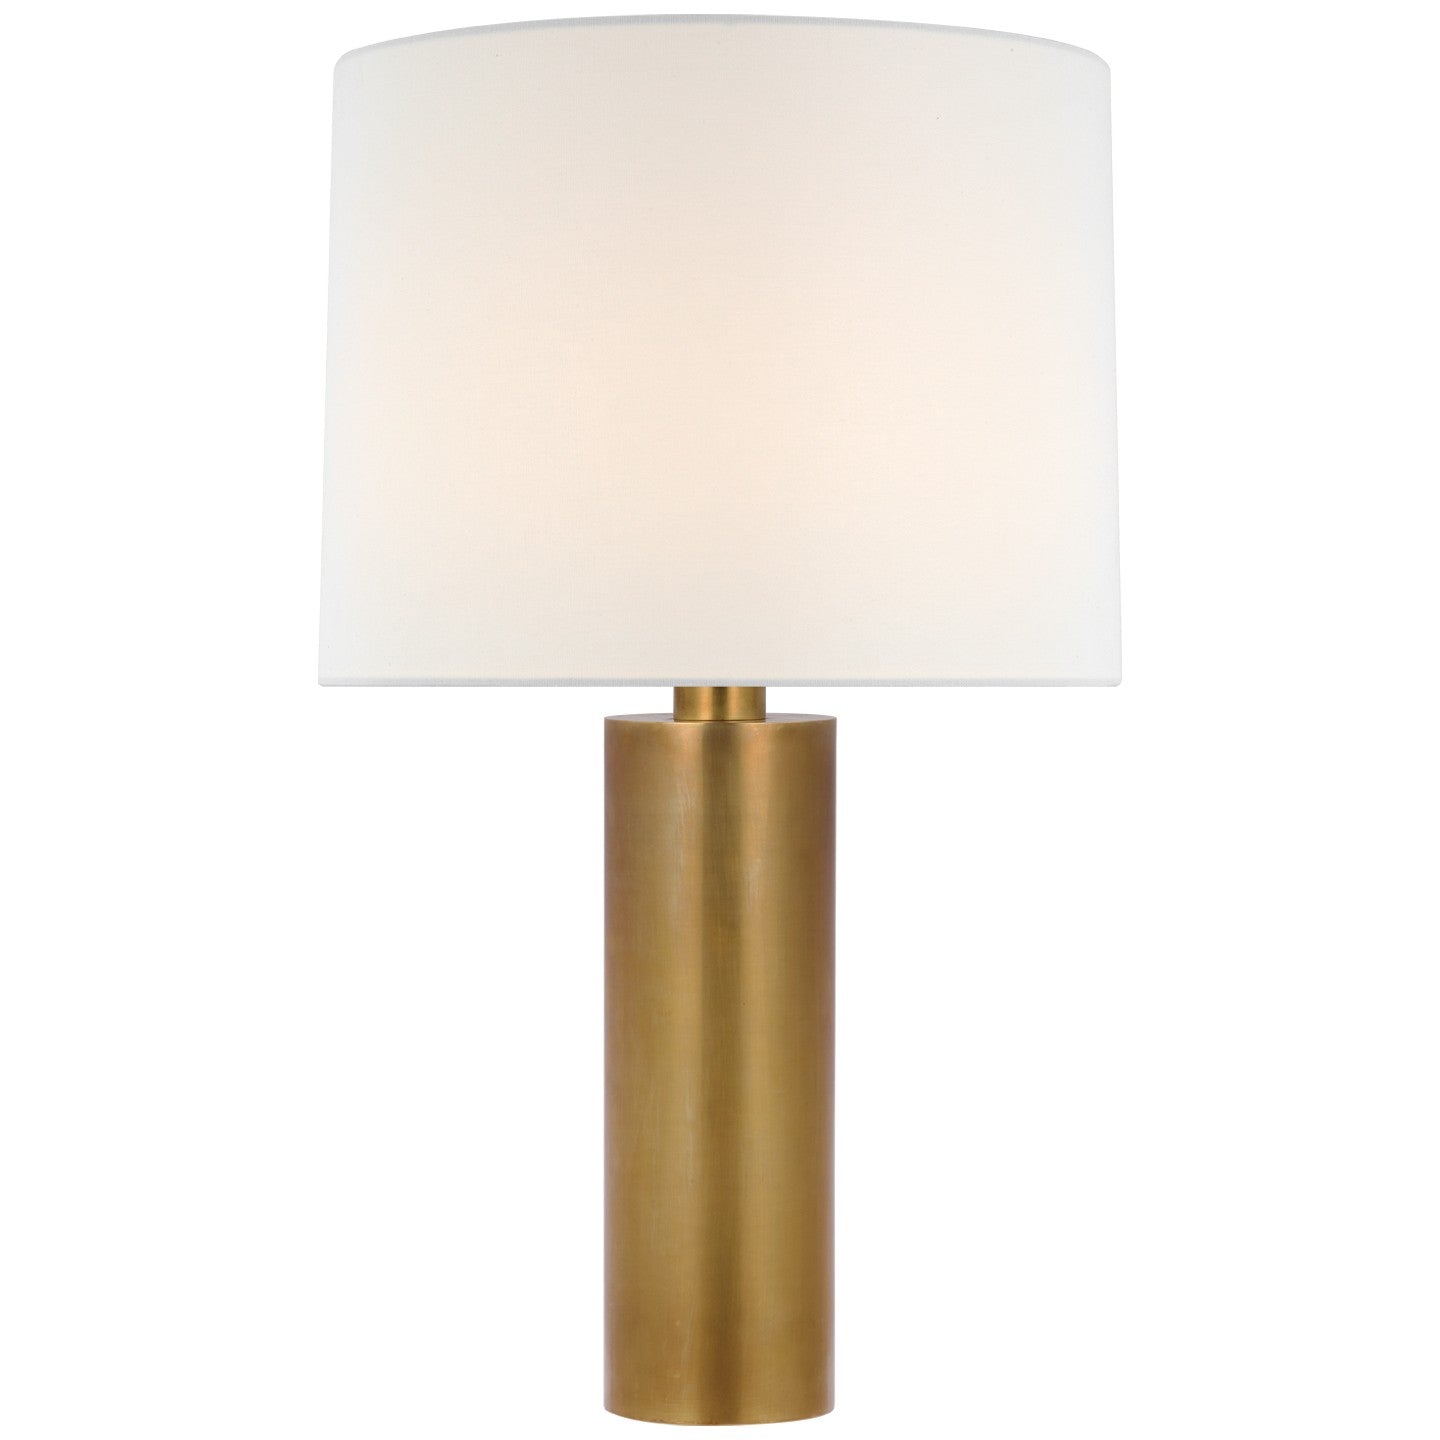 Visual Comfort Signature - PCD 3010HAB-L - LED Table Lamp - Sylvie - Hand-Rubbed Antique Brass